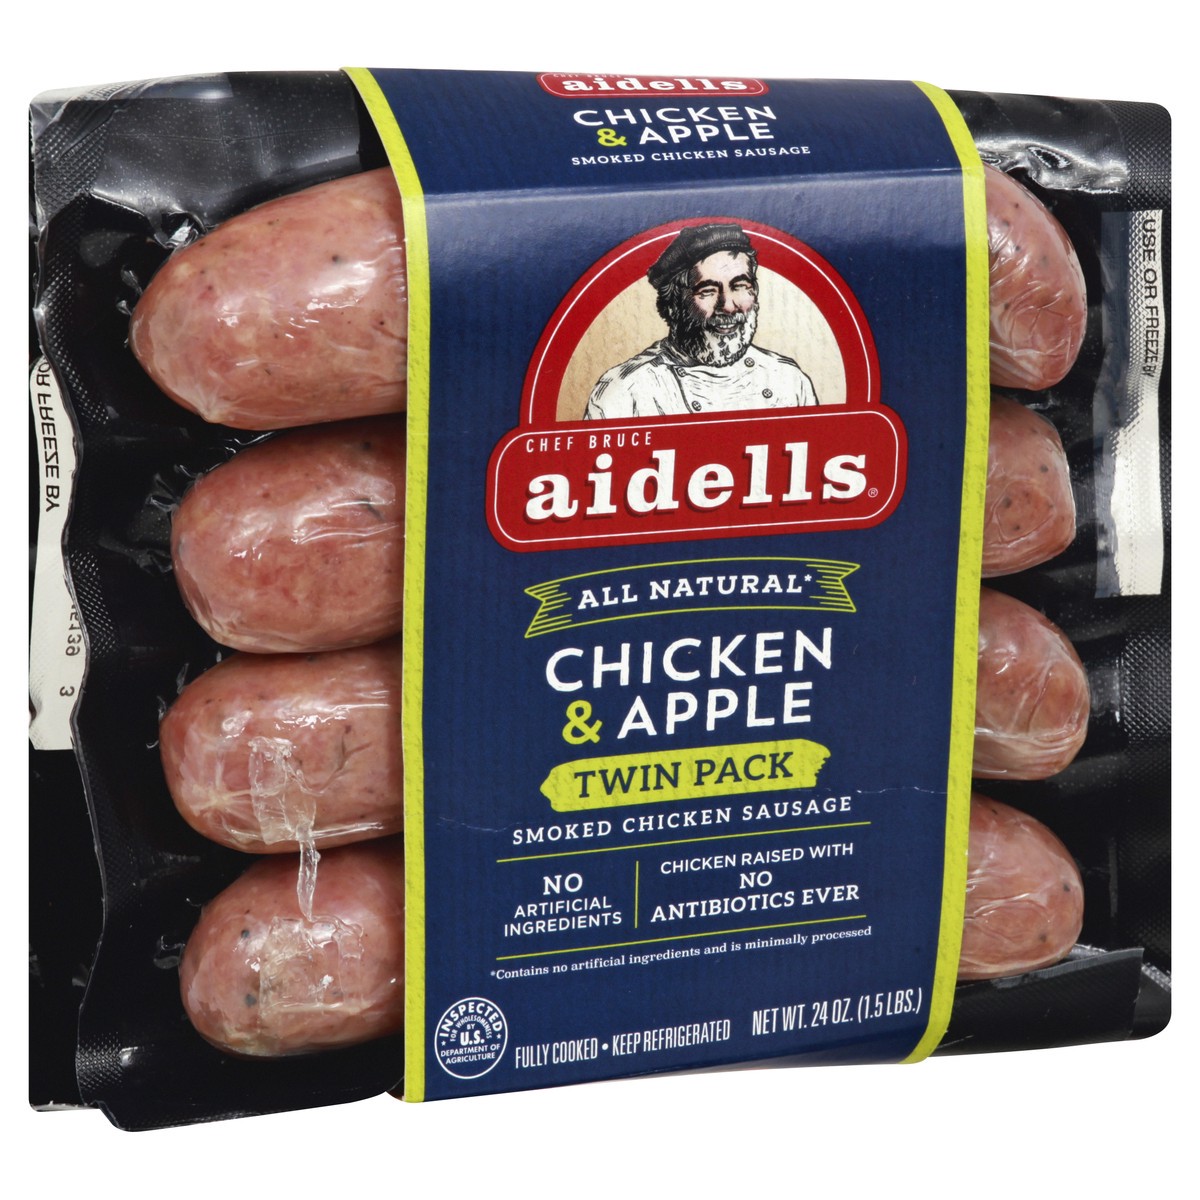 slide 10 of 10, Aidells Smoked Chicken Sausage, Chicken & Apple, Twin Pack, 24 oz. (8 Fully Cooked Links), 24 oz